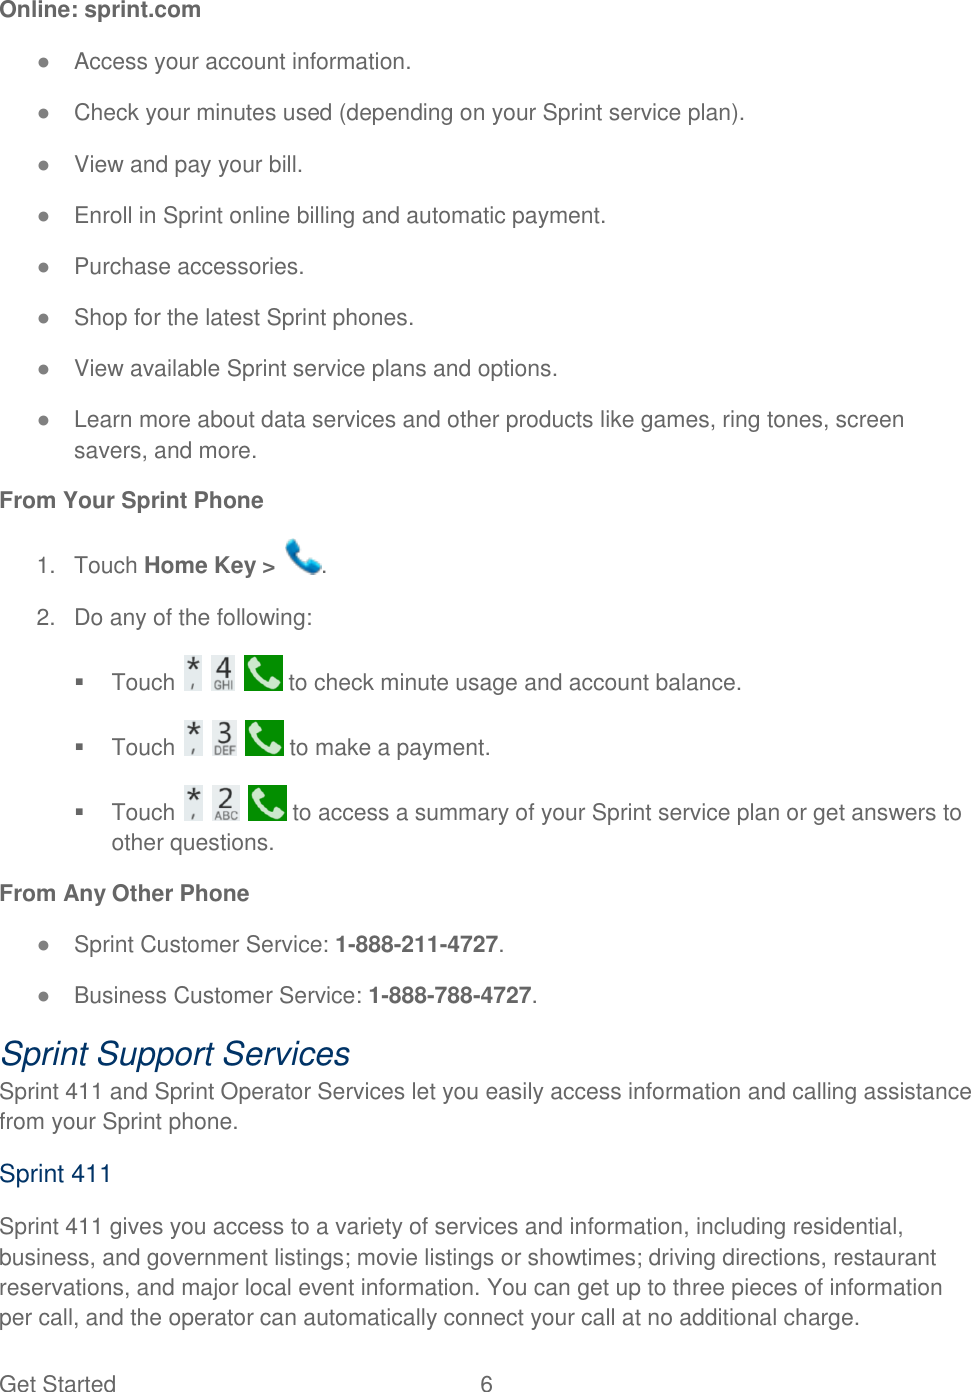 Get Started  6   Online: sprint.com ● Access your account information. ● Check your minutes used (depending on your Sprint service plan). ● View and pay your bill. ● Enroll in Sprint online billing and automatic payment. ● Purchase accessories. ● Shop for the latest Sprint phones. ● View available Sprint service plans and options. ● Learn more about data services and other products like games, ring tones, screen savers, and more. From Your Sprint Phone 1.  Touch Home Key &gt;  . 2.  Do any of the following:   Touch       to check minute usage and account balance.   Touch       to make a payment.   Touch       to access a summary of your Sprint service plan or get answers to other questions. From Any Other Phone ● Sprint Customer Service: 1-888-211-4727. ● Business Customer Service: 1-888-788-4727. Sprint Support Services Sprint 411 and Sprint Operator Services let you easily access information and calling assistance from your Sprint phone. Sprint 411 Sprint 411 gives you access to a variety of services and information, including residential, business, and government listings; movie listings or showtimes; driving directions, restaurant reservations, and major local event information. You can get up to three pieces of information per call, and the operator can automatically connect your call at no additional charge. 